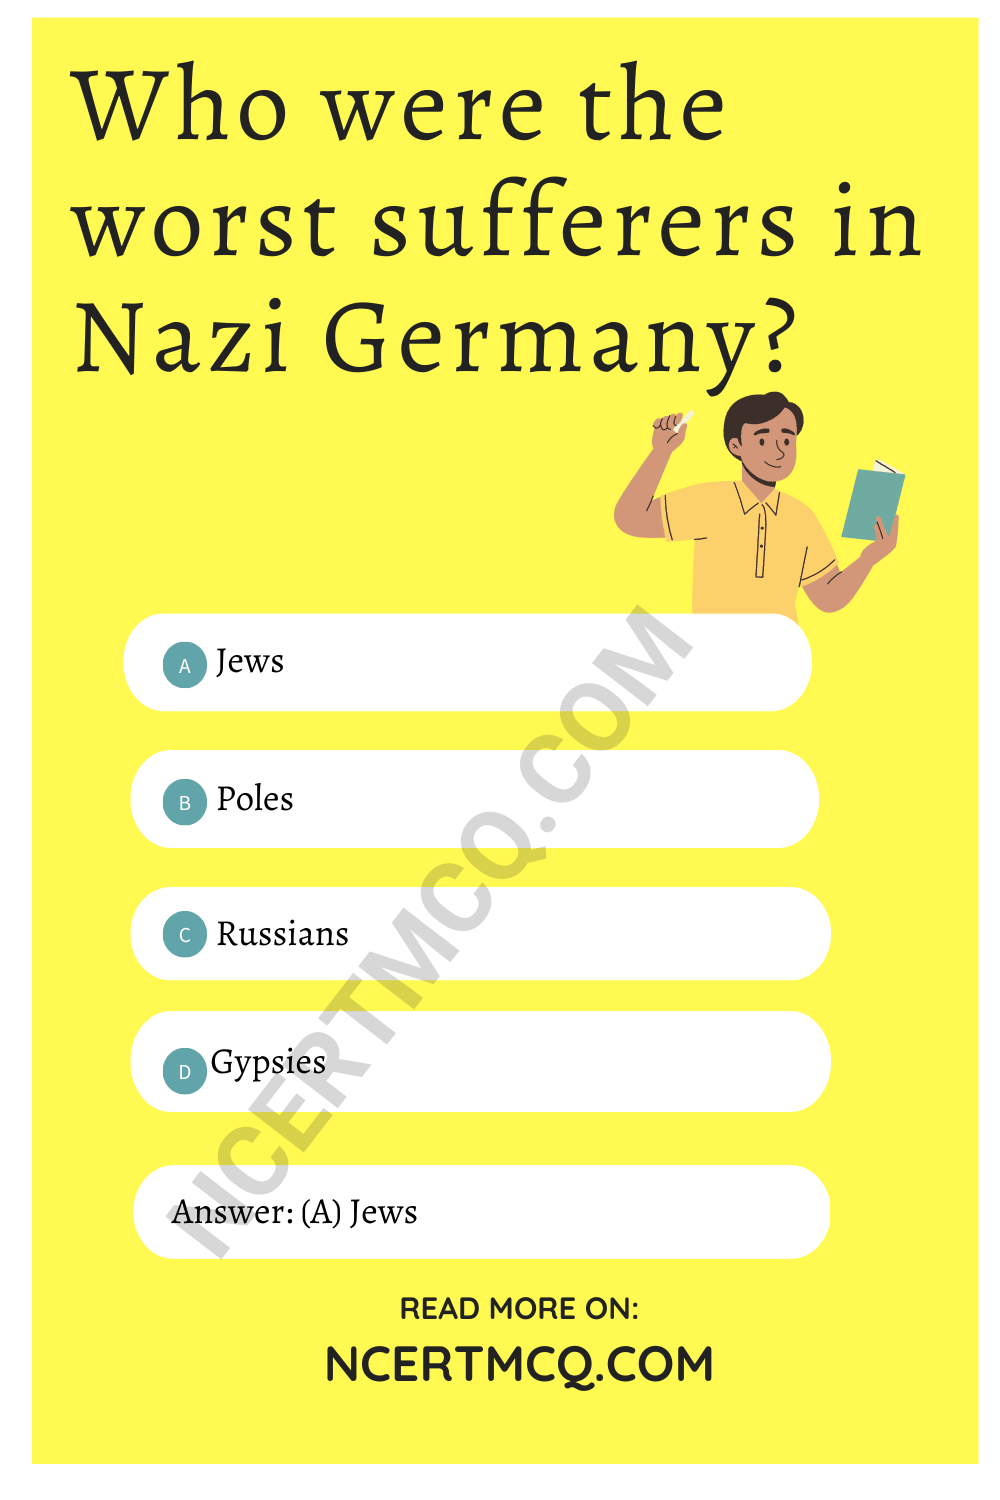 Who were the worst sufferers in Nazi Germany?